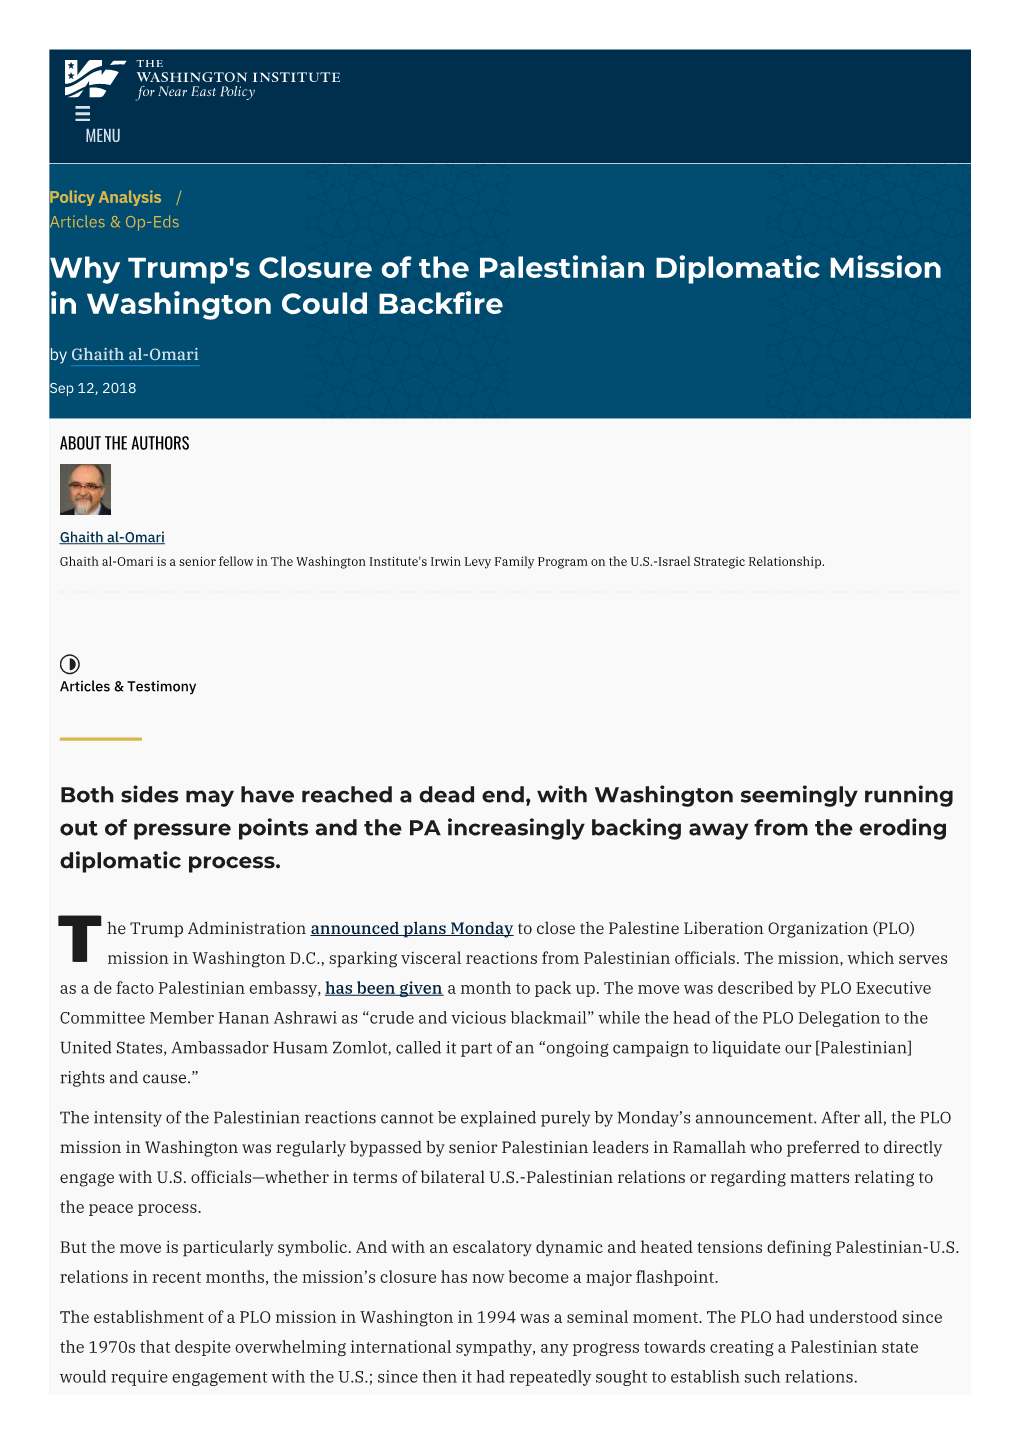 Why Trump's Closure of the Palestinian Diplomatic Mission in Washington Could Backfire by Ghaith Al-Omari